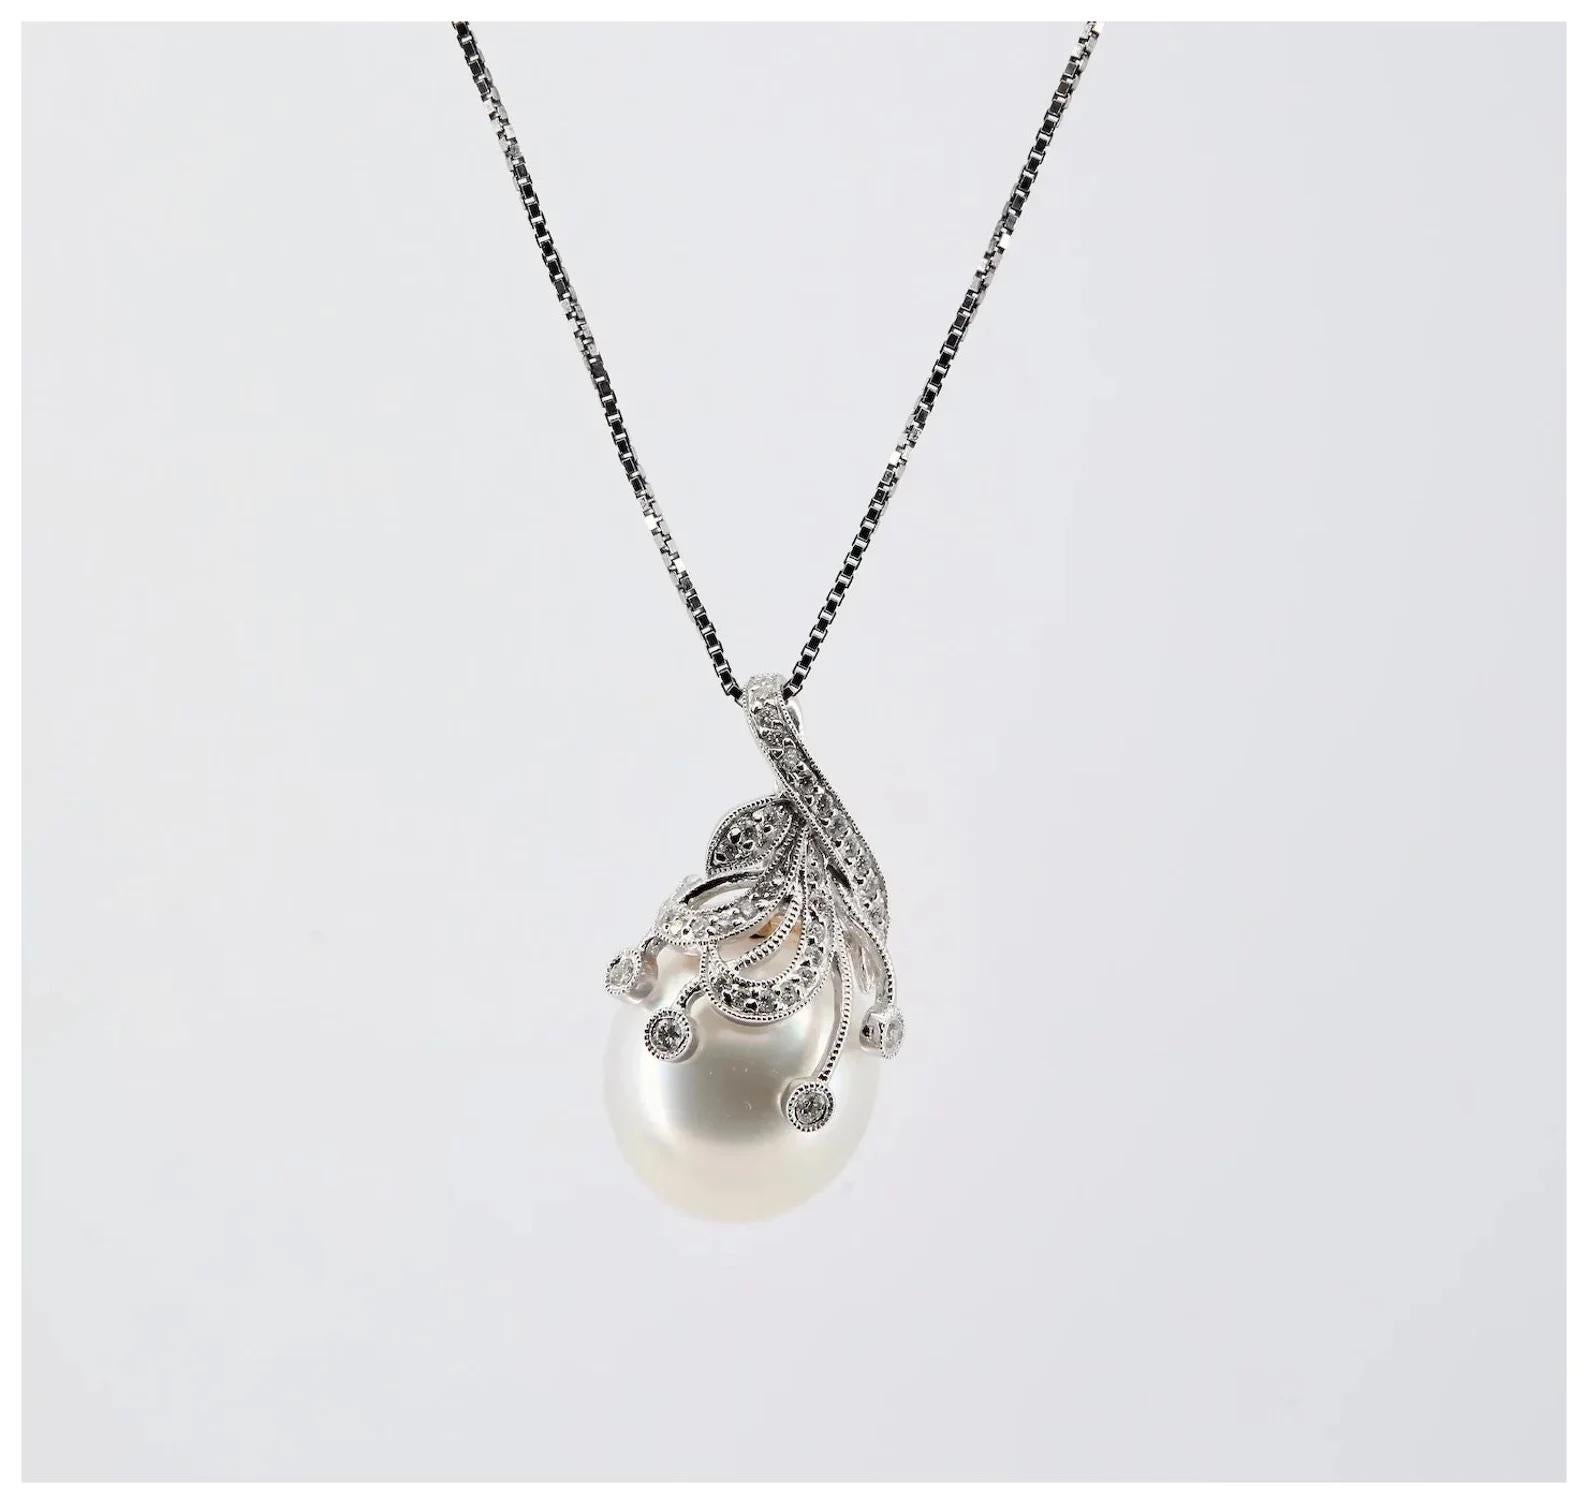 A contemporary South Sea Pearl and diamond pendant in 18 karat white gold.

The 13mm south sea pearl of iridescent white color with very good luster.

Pave set with 0.20 carats total of round brilliant cut diamonds of G color, SI1 clarity.

Tested